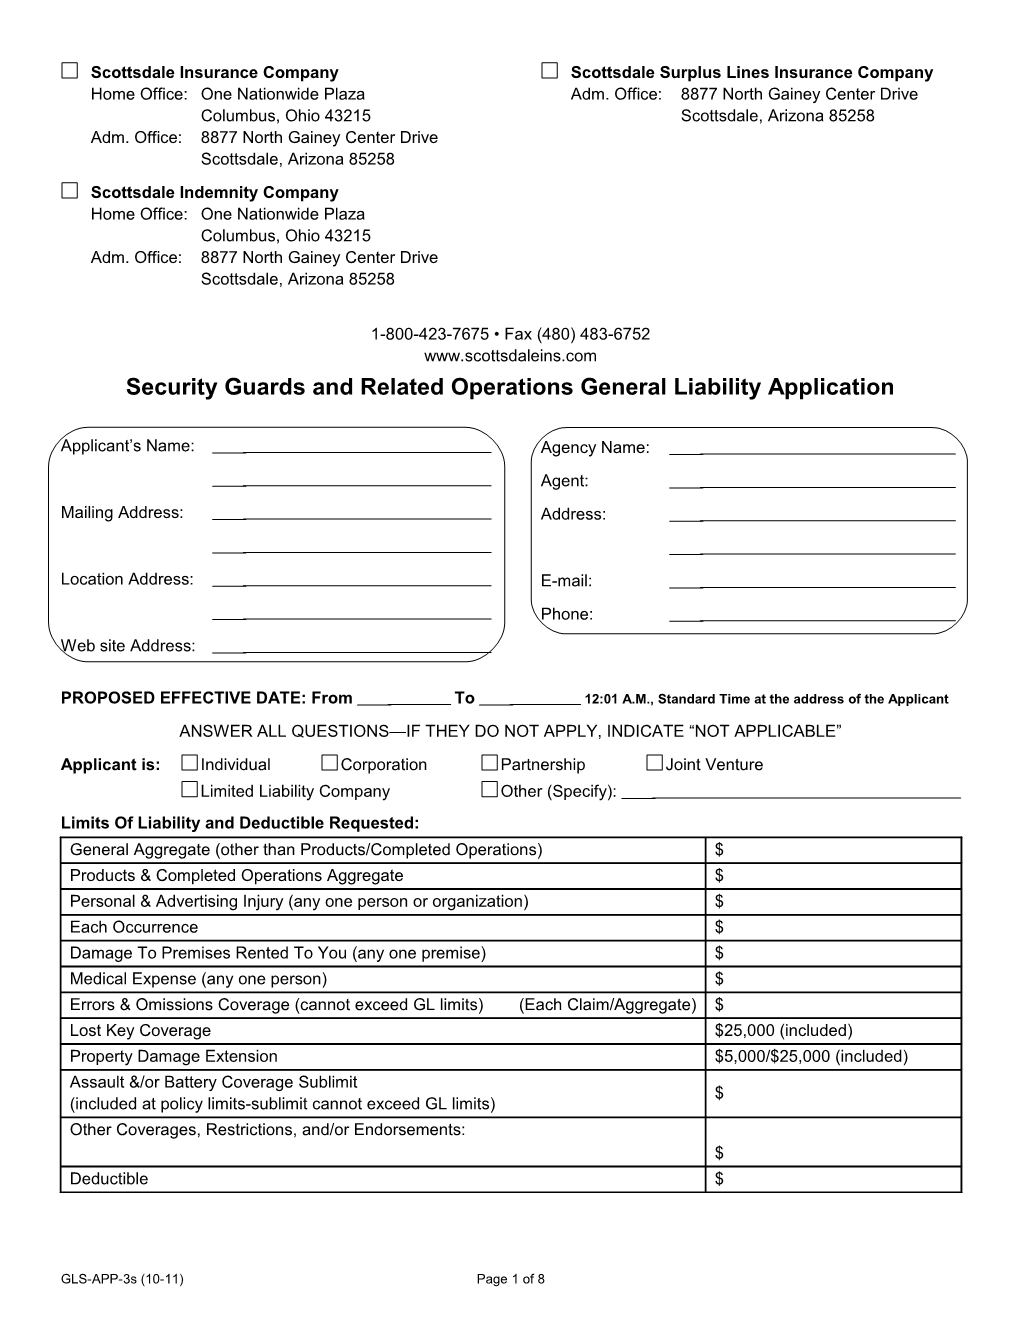 Security Guards and Related Operations General Liability Application